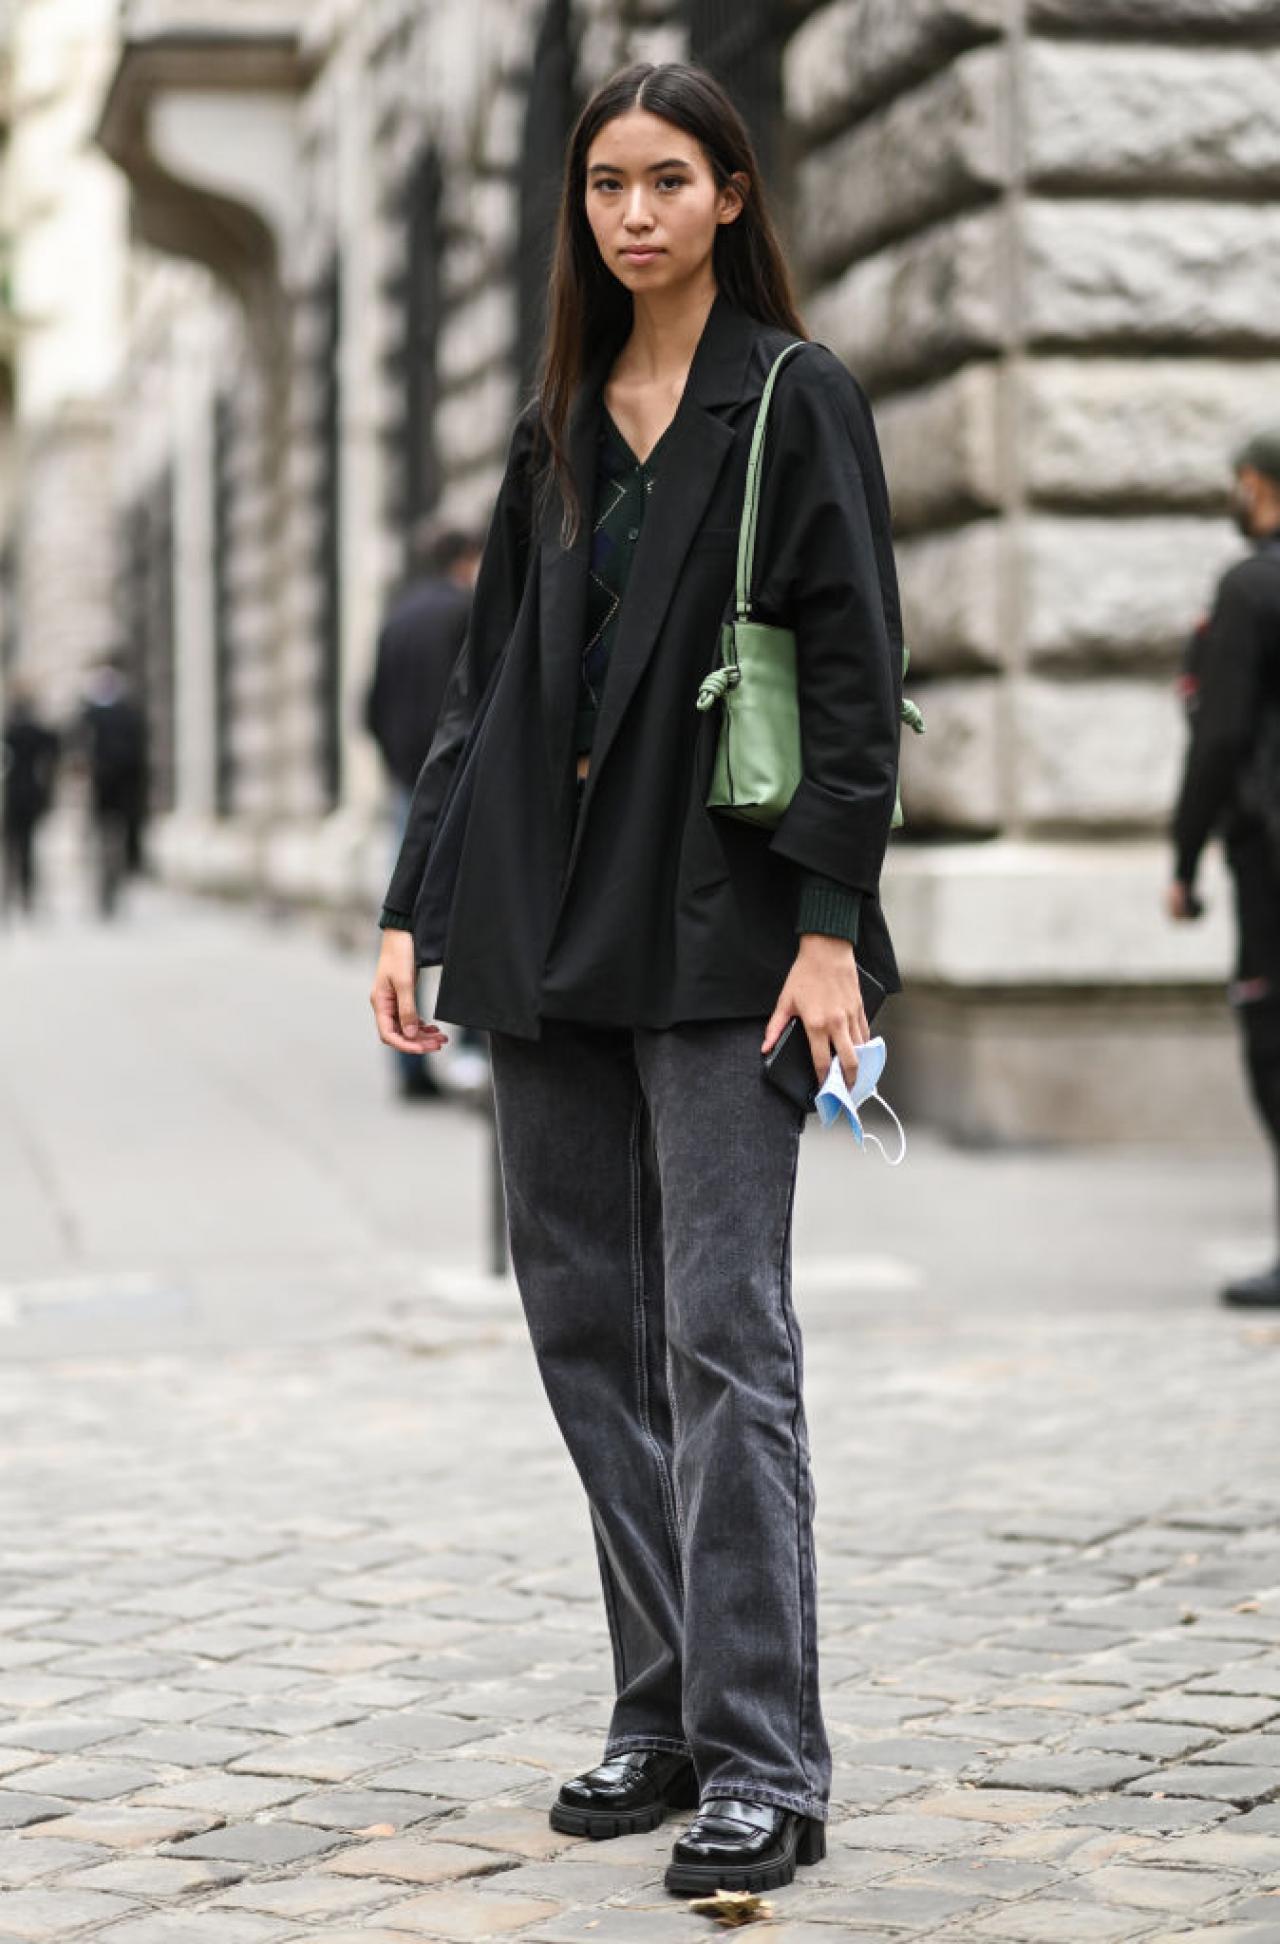 PARIS, FRANCE - OCTOBER 01: Model Cassady Smith is seen wearing a black jacket, green sweater, gray jeans with green bag outside the Loewe show during Paris Fashion Week S/S 2022 on October 01, 2021 in Paris, France. (Photo by Daniel Zuchnik/Getty Images)